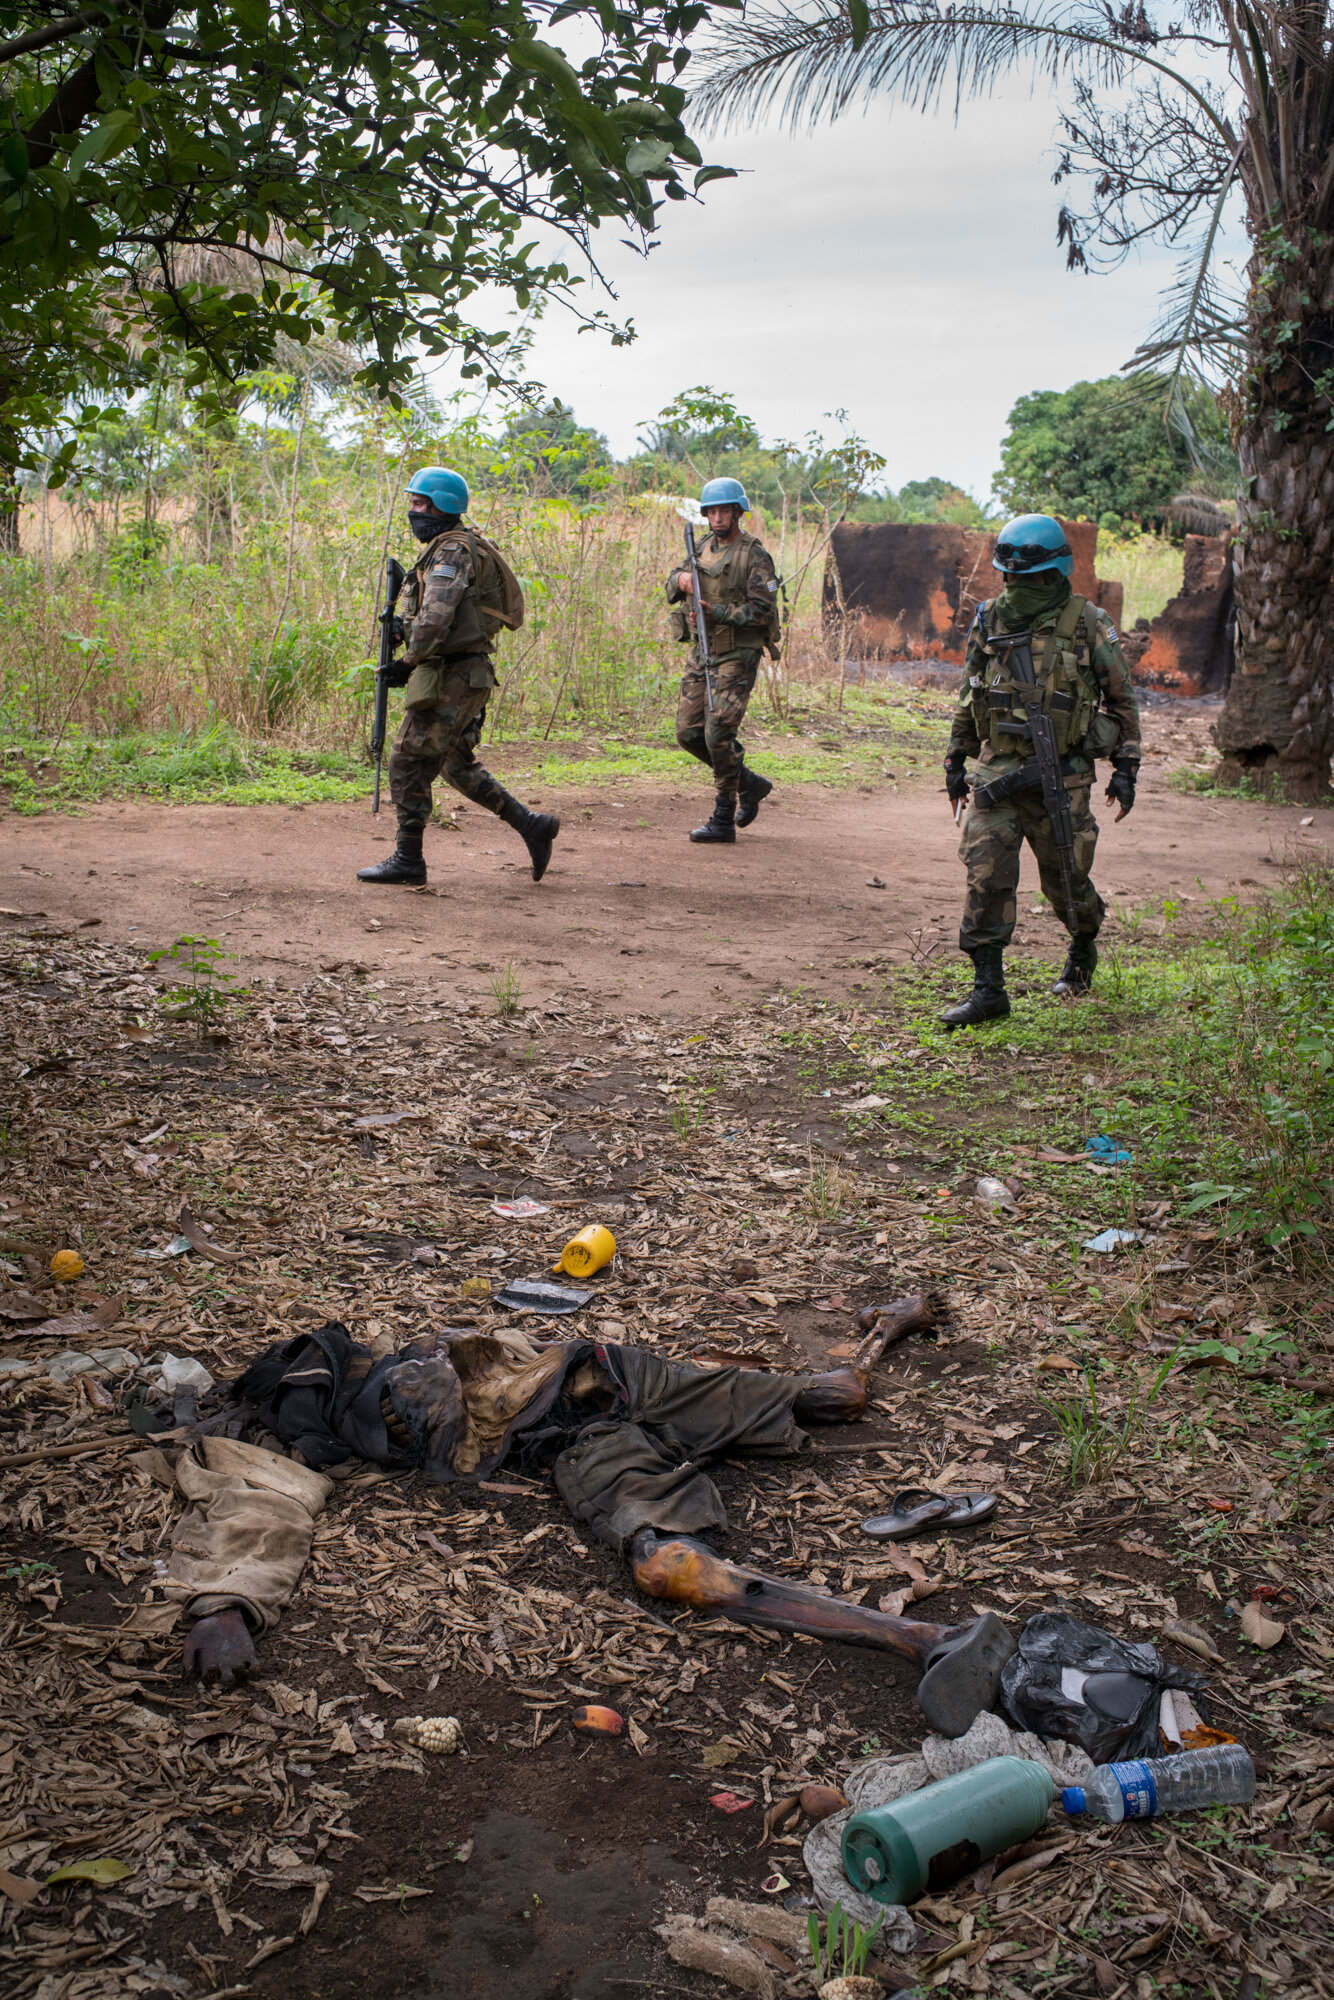  Soldiers of the Uruguyan forces to MONUSCO, the UN peacekeeping mission in the DRC, discover a partially decomposed corpse in Nyamamba, a deserted lakeside village that lies in ruins after attacks from militias a week prior. March 18, 2018. Nyamamba